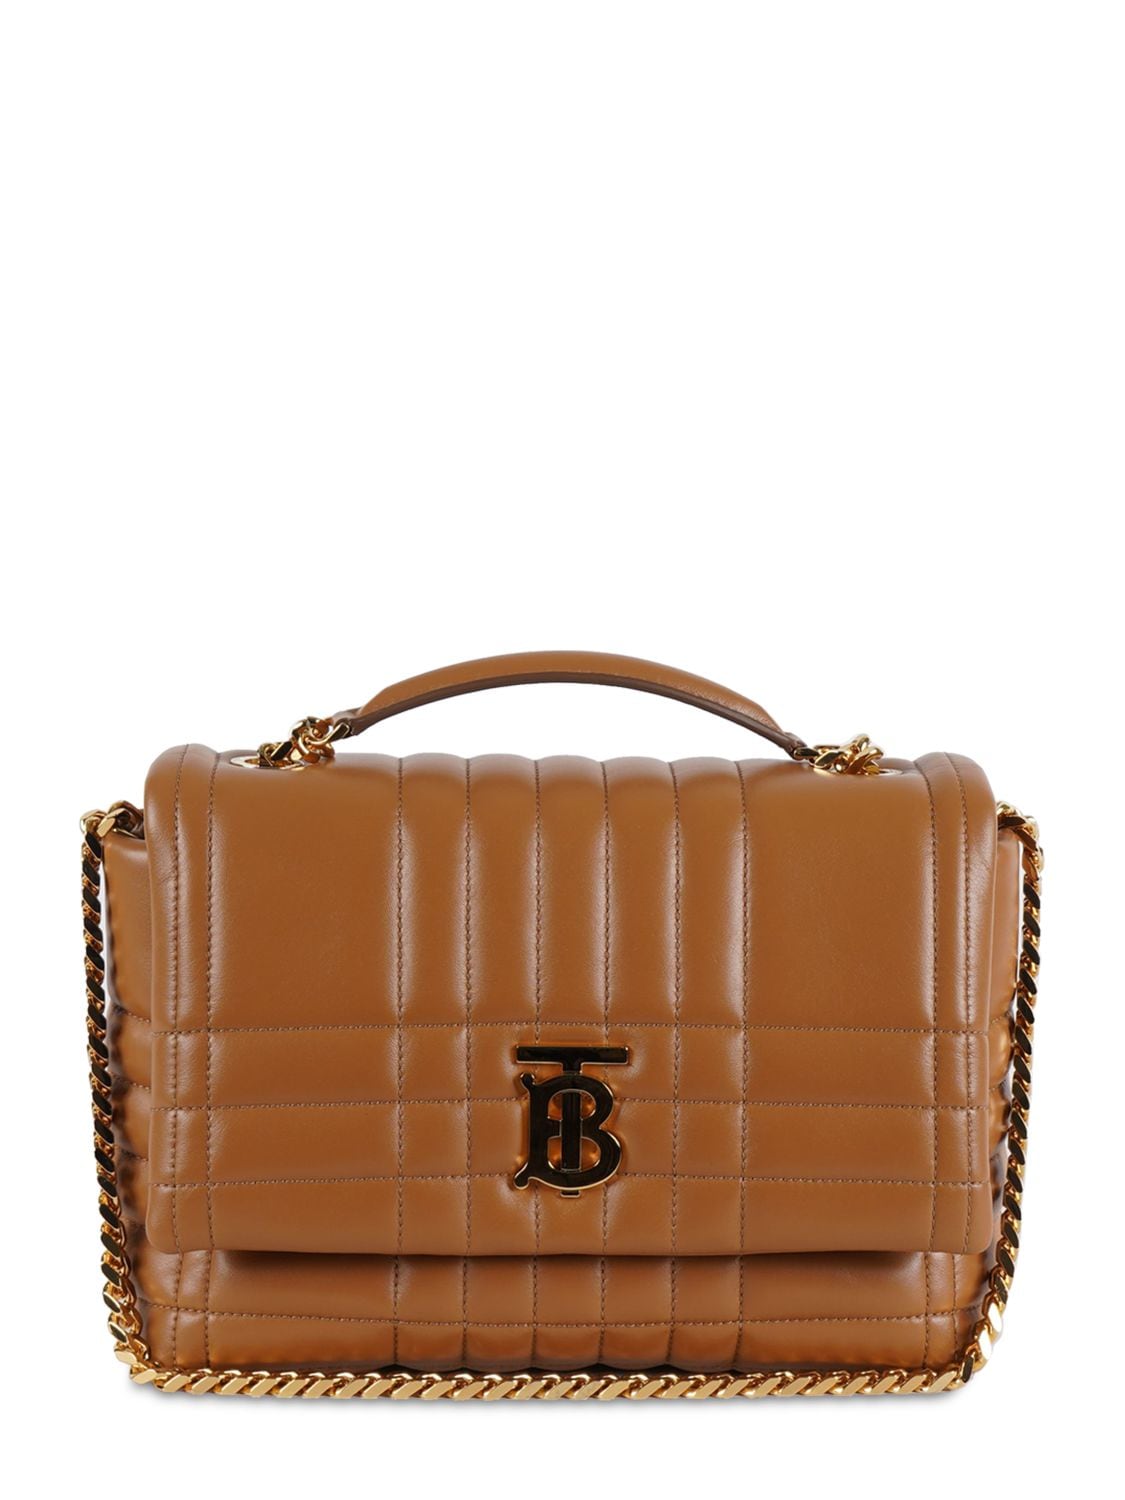 Burberry Small Lola Satchel Quilted Leather Bag In Marple Brown | ModeSens